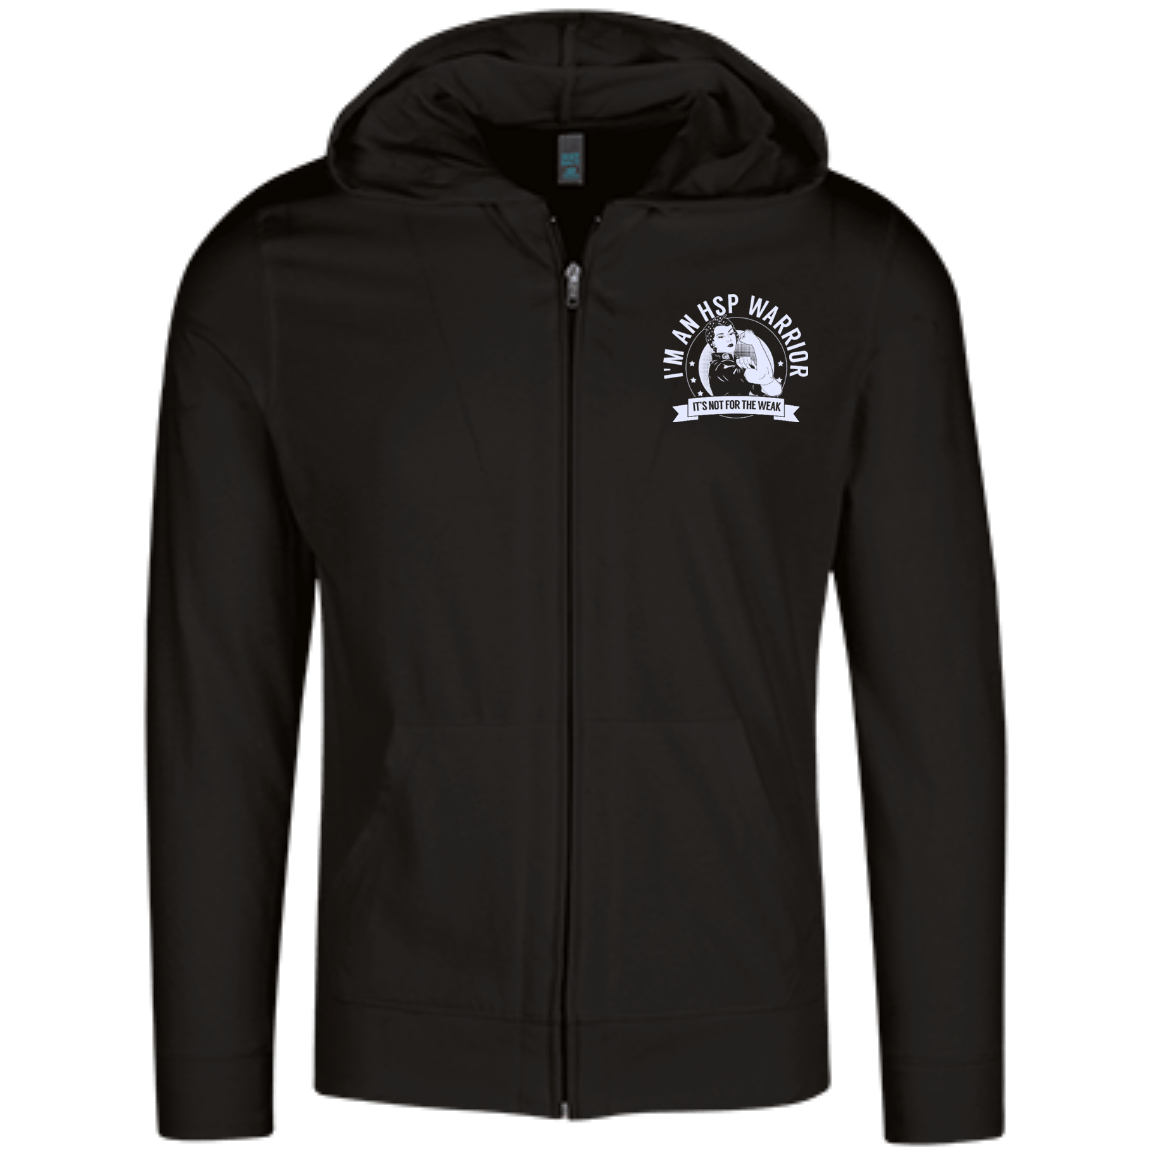 Hereditary Spastic Paraparesis - HSP Warrior Not For The Weak Full Zip Hoodie - The Unchargeables